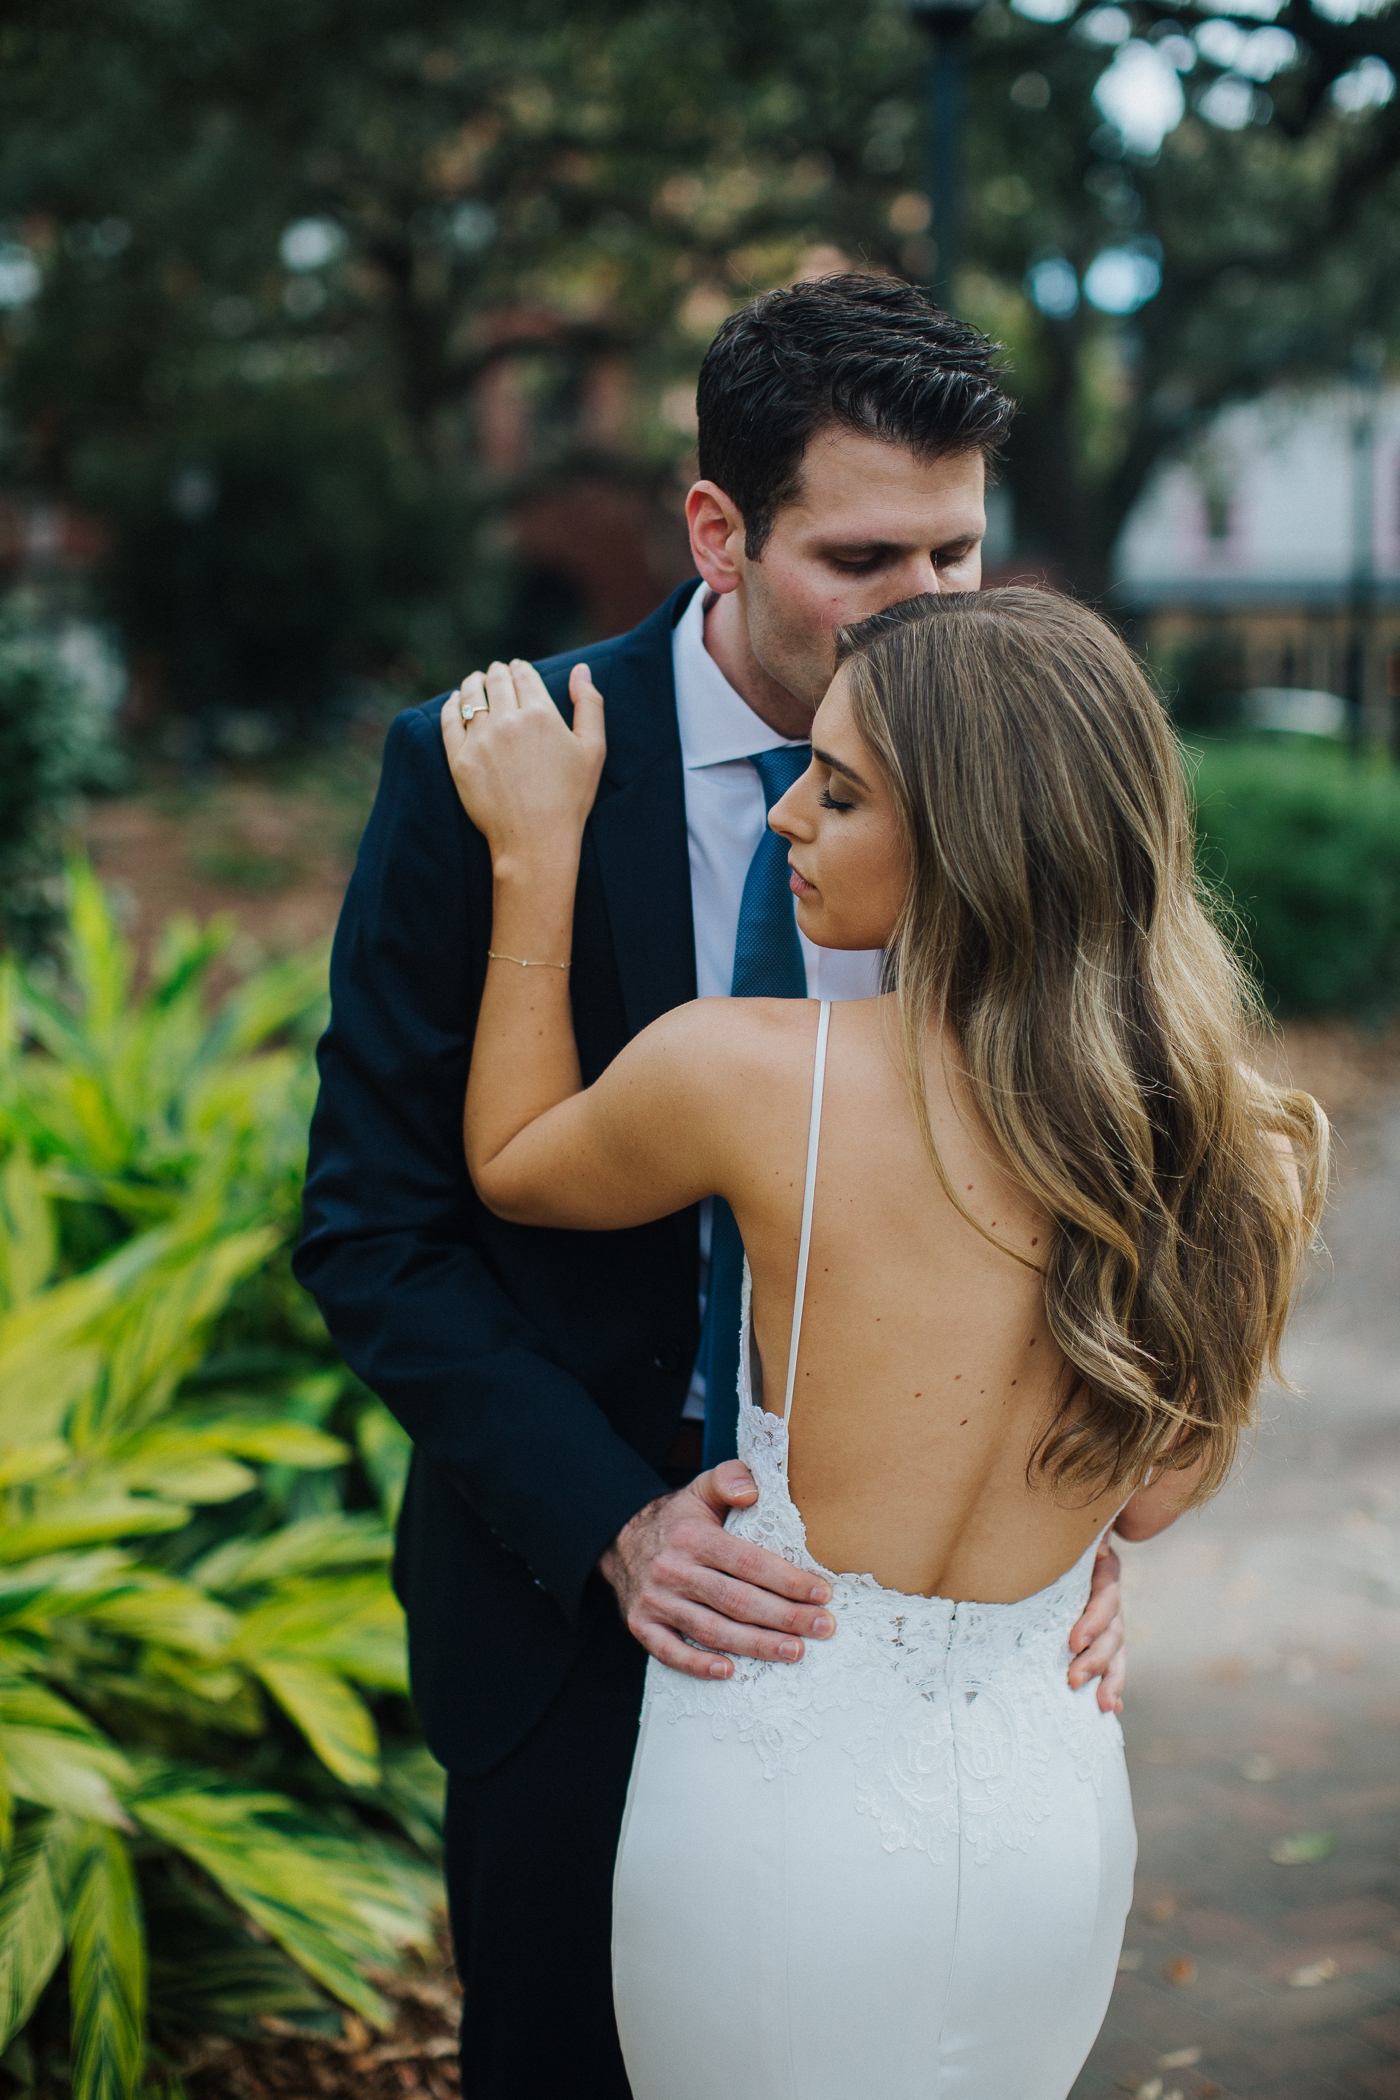 Taylor and Brett’s Spring Destination Wedding in Savannah by Izzy Hudgins Photography